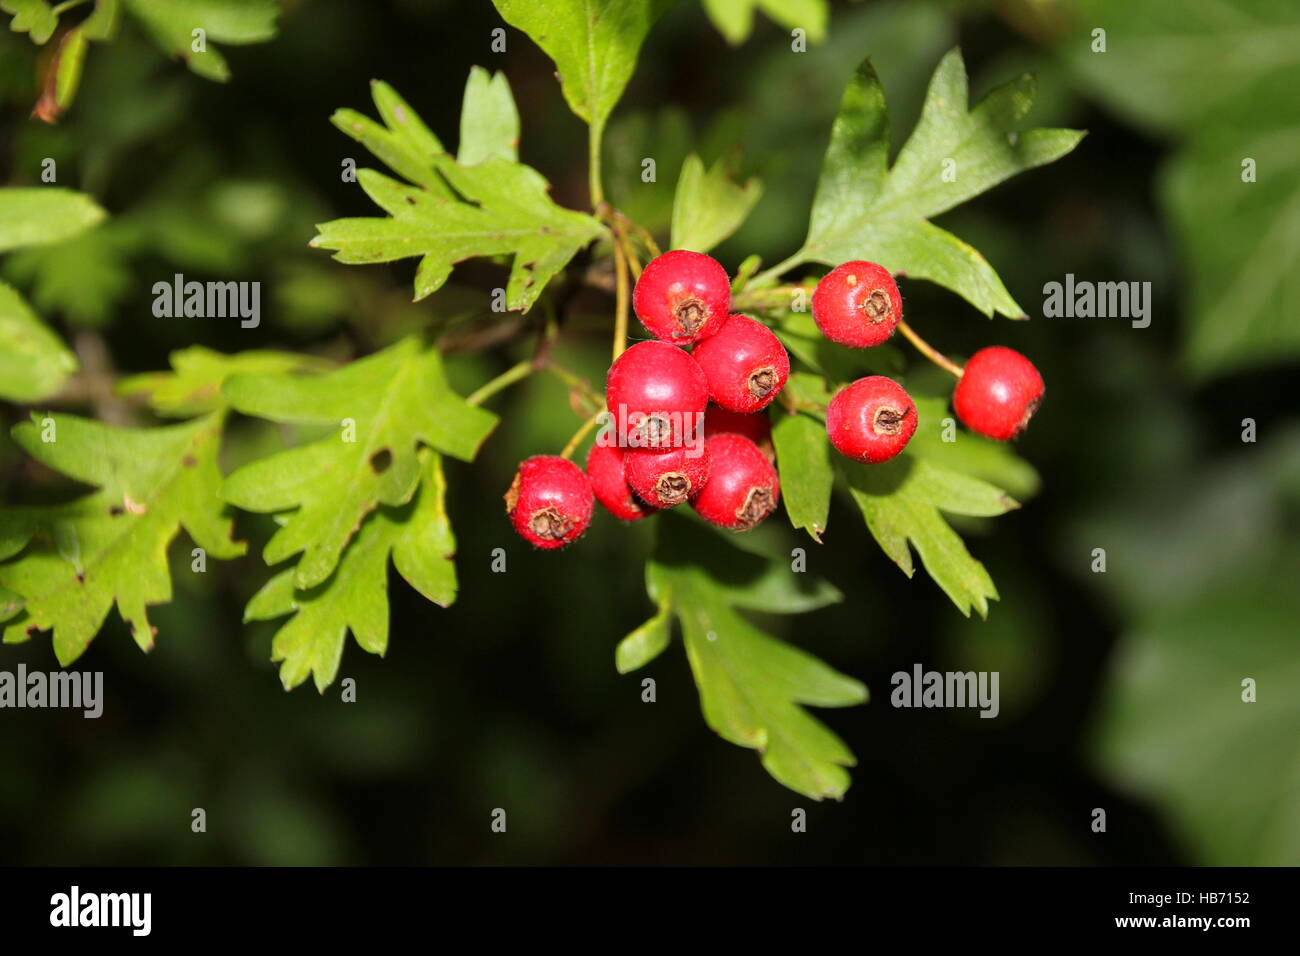 Weissdorn herbal plant with is good for the heart Stock Photo